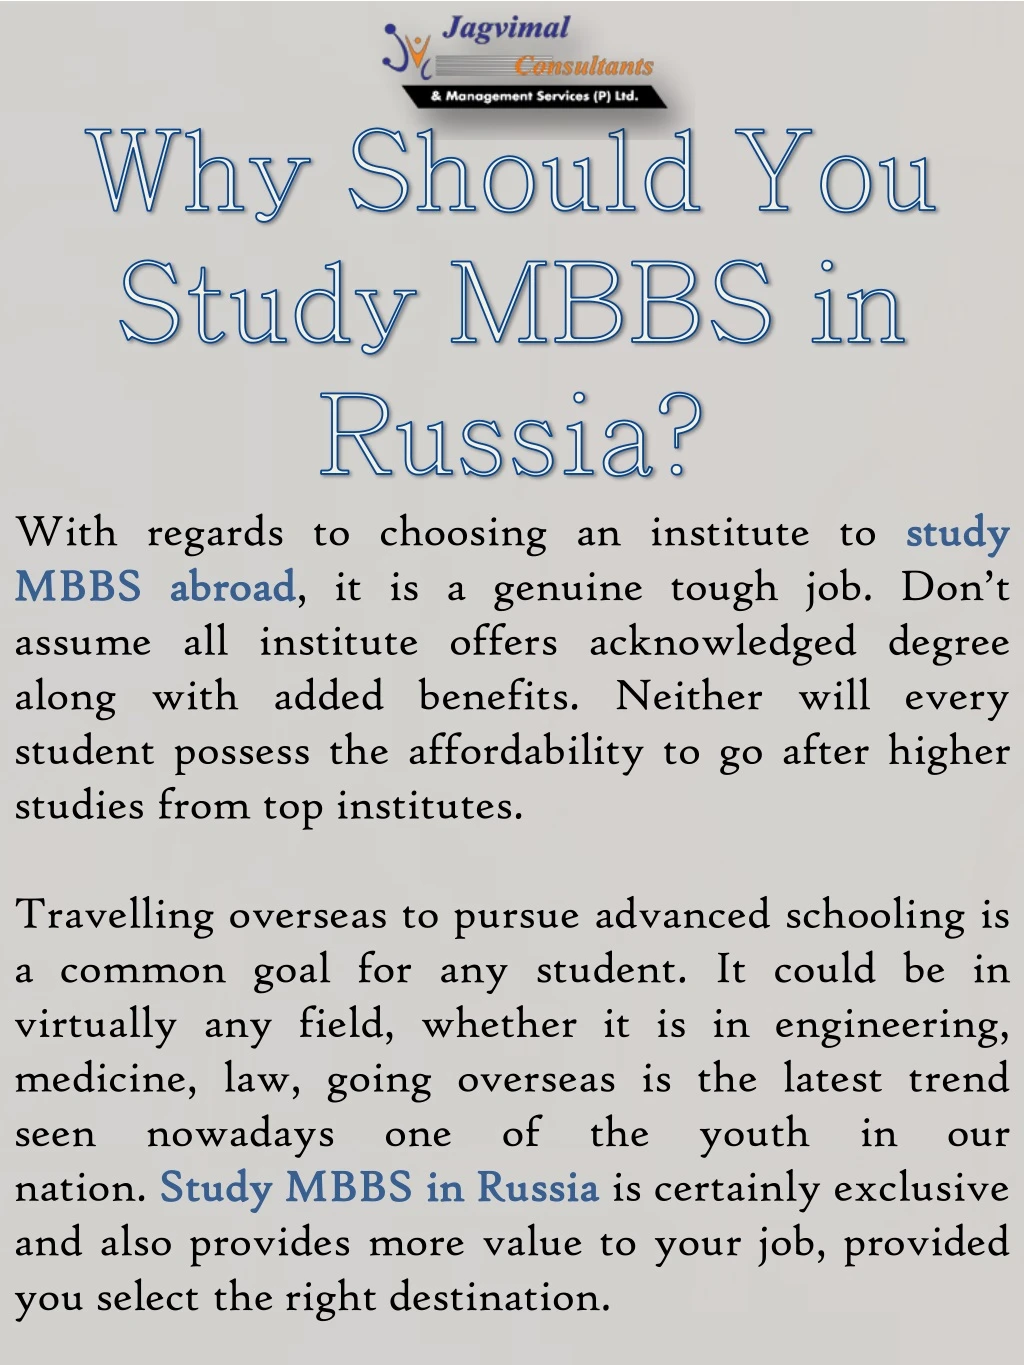 with regards to choosing an institute to study